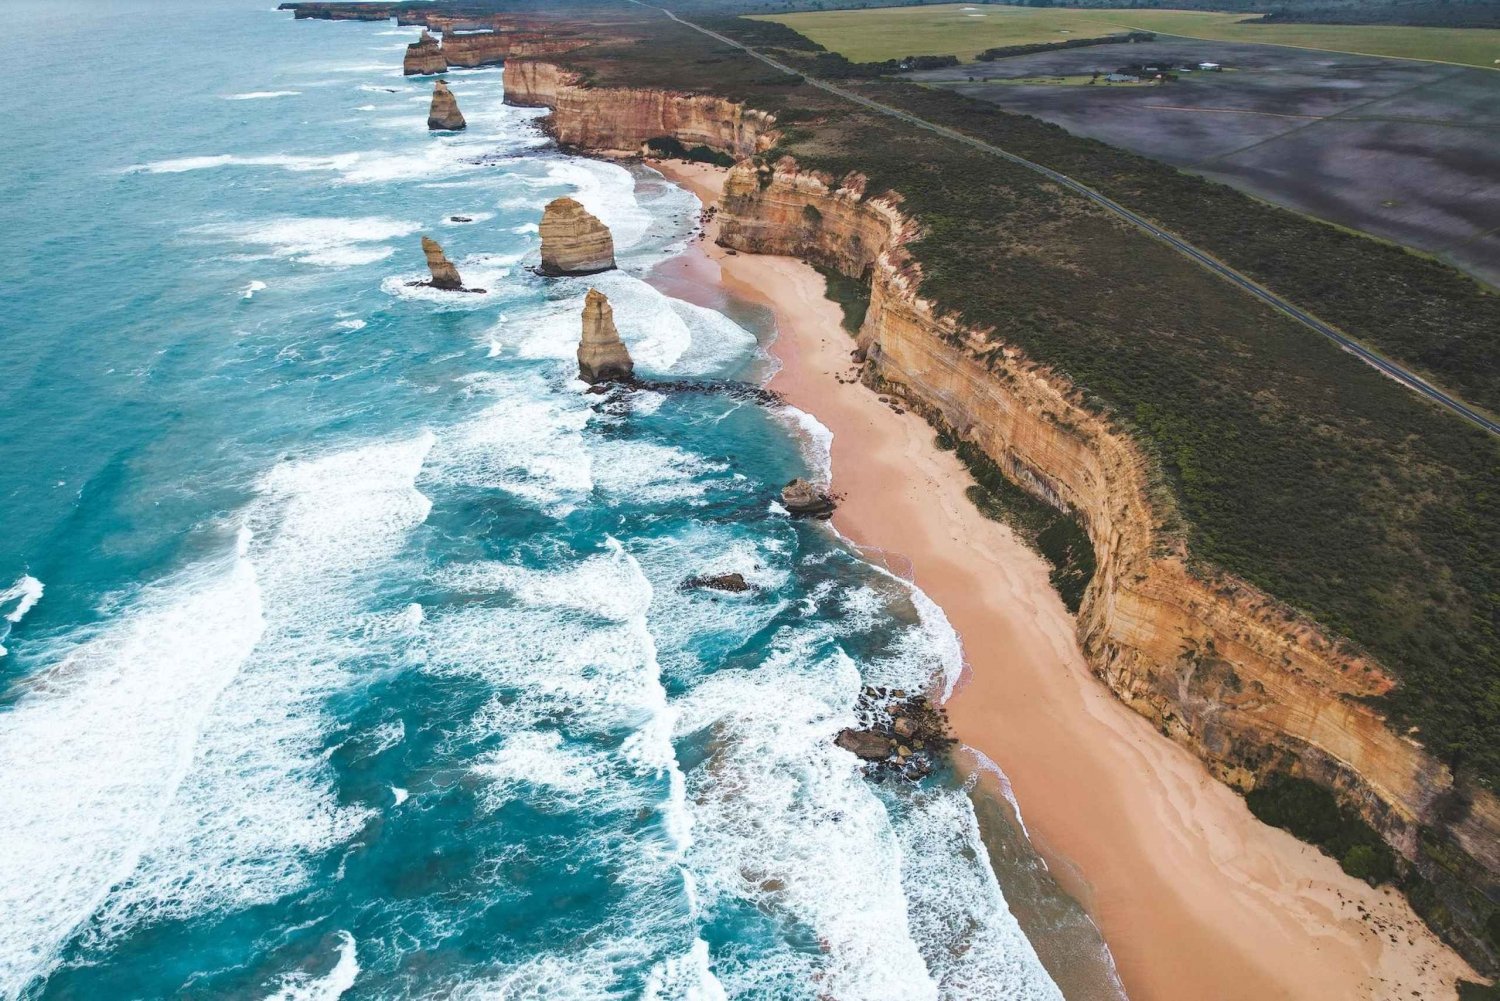 Melbourne: Private Great Ocean Road day tour with lunch!